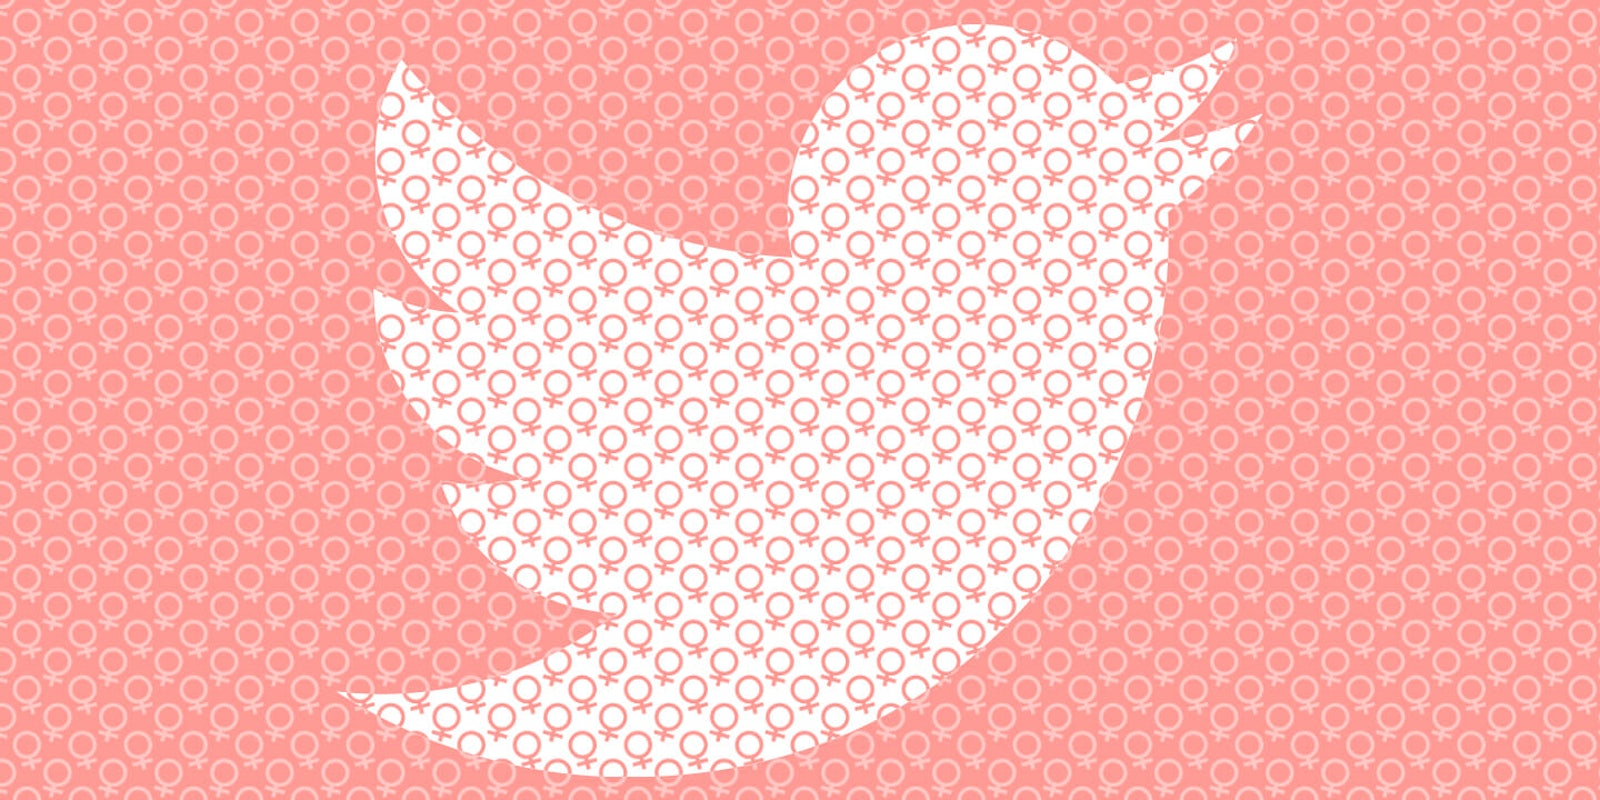 A Twitter bird icon made up of female symbols